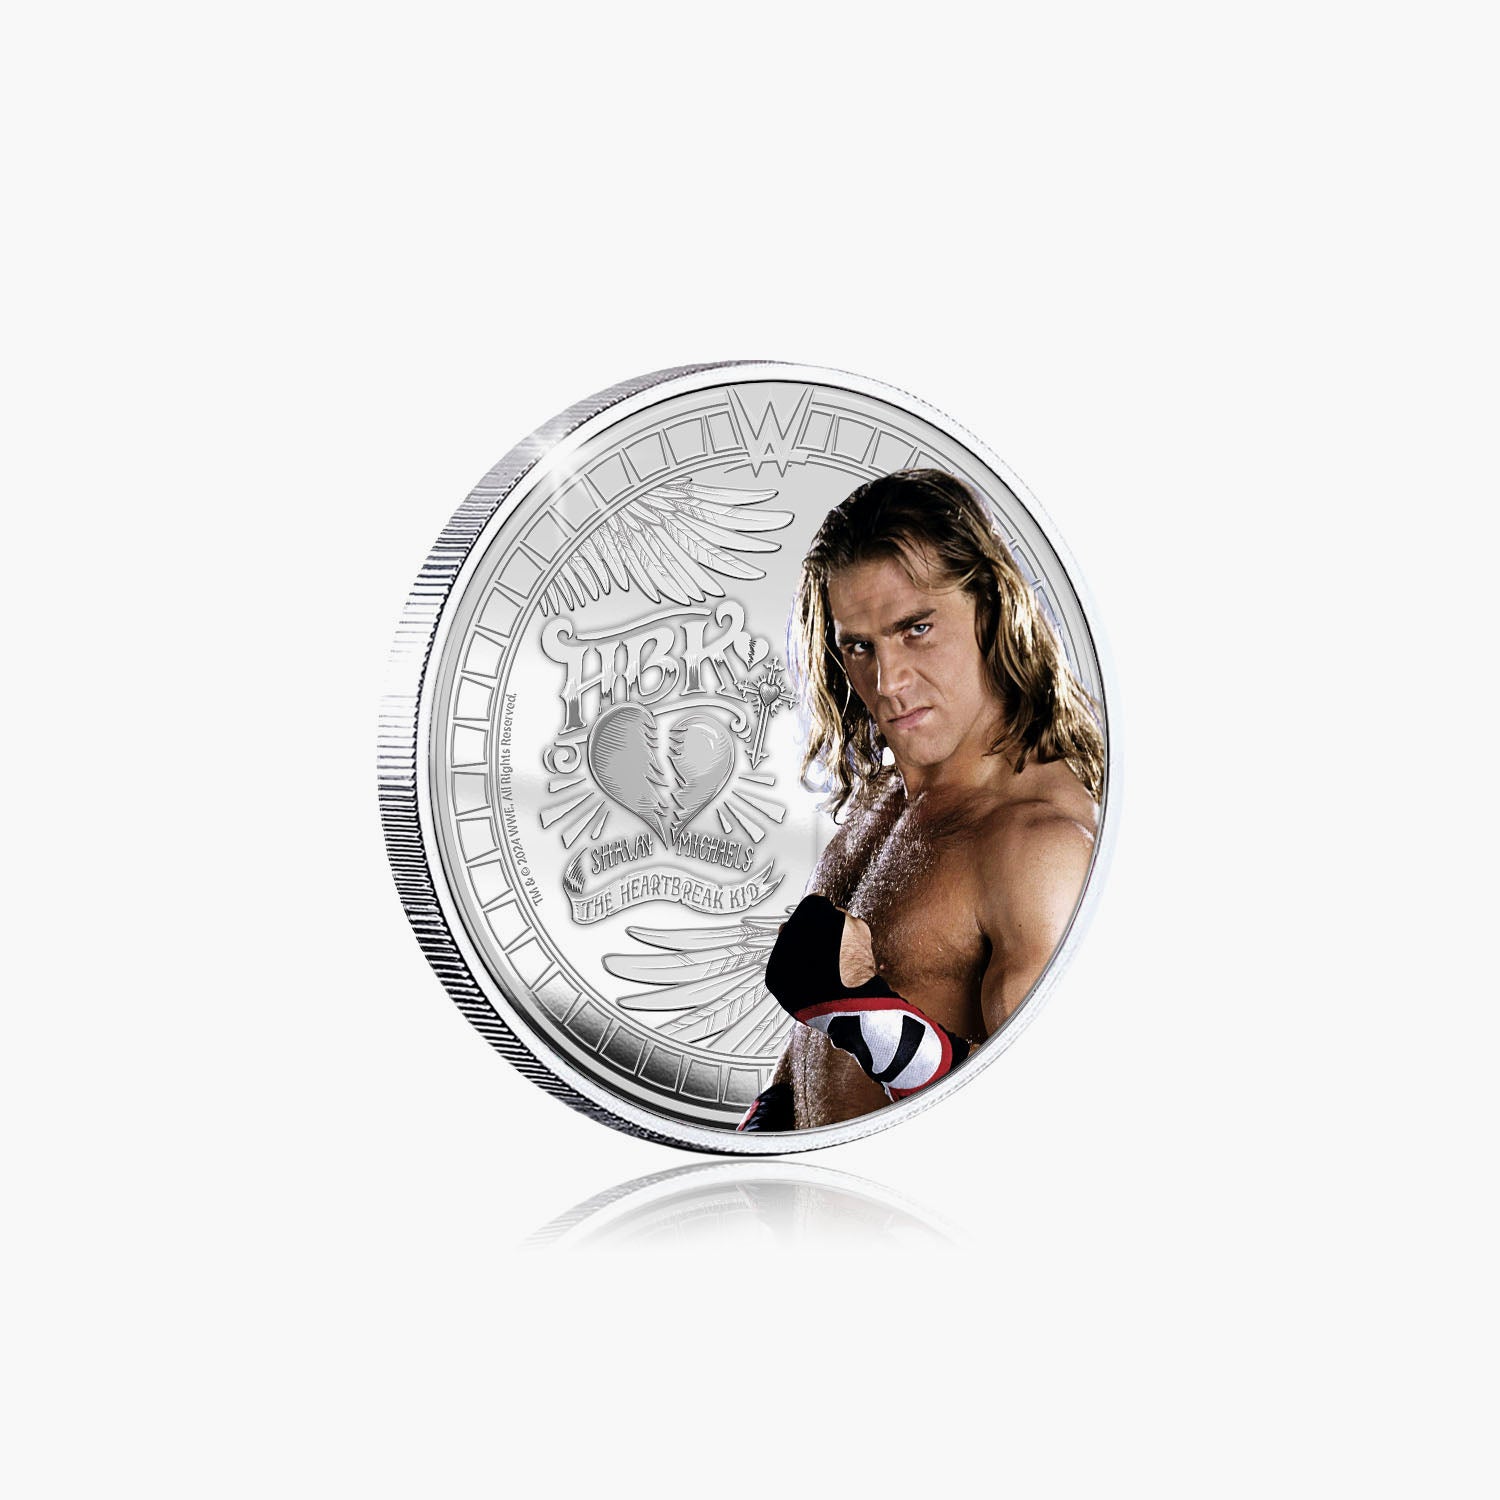 WWE Commemorative Collection - Shawn Michaels - 32mm Silver Plated Commemorative